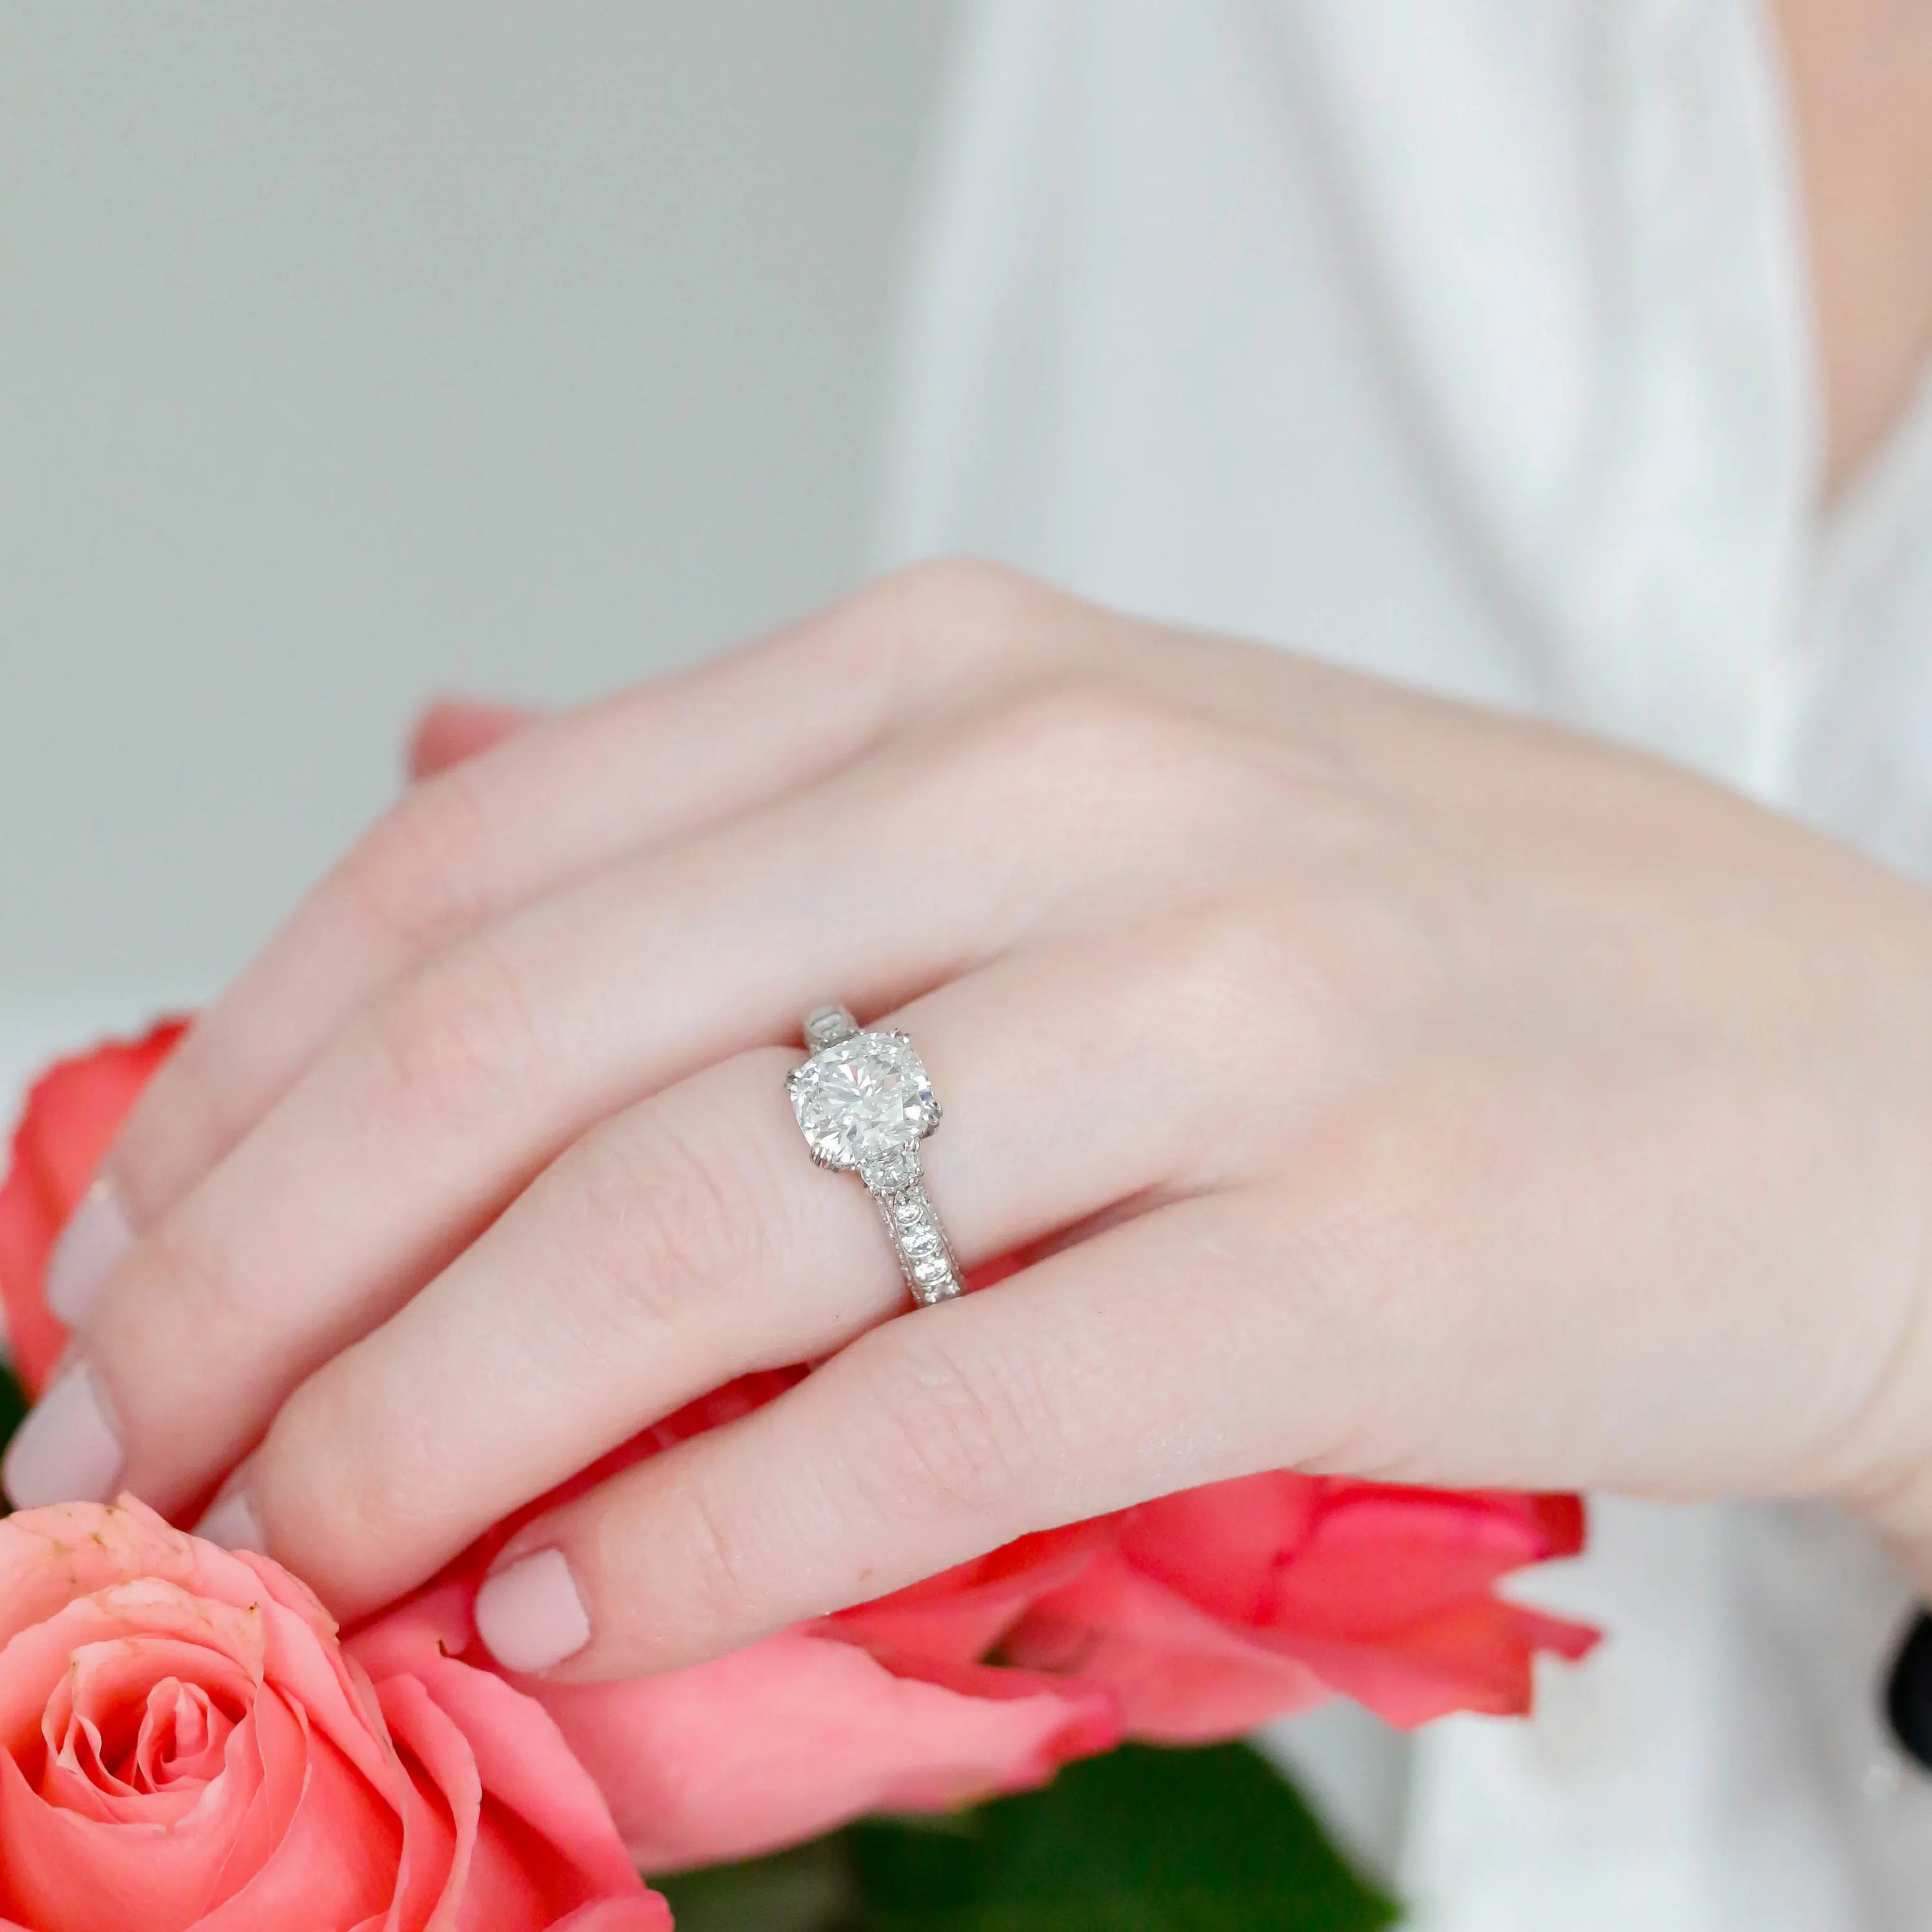 The Difference Between Cushion Cut and Princess Cut Diamonds